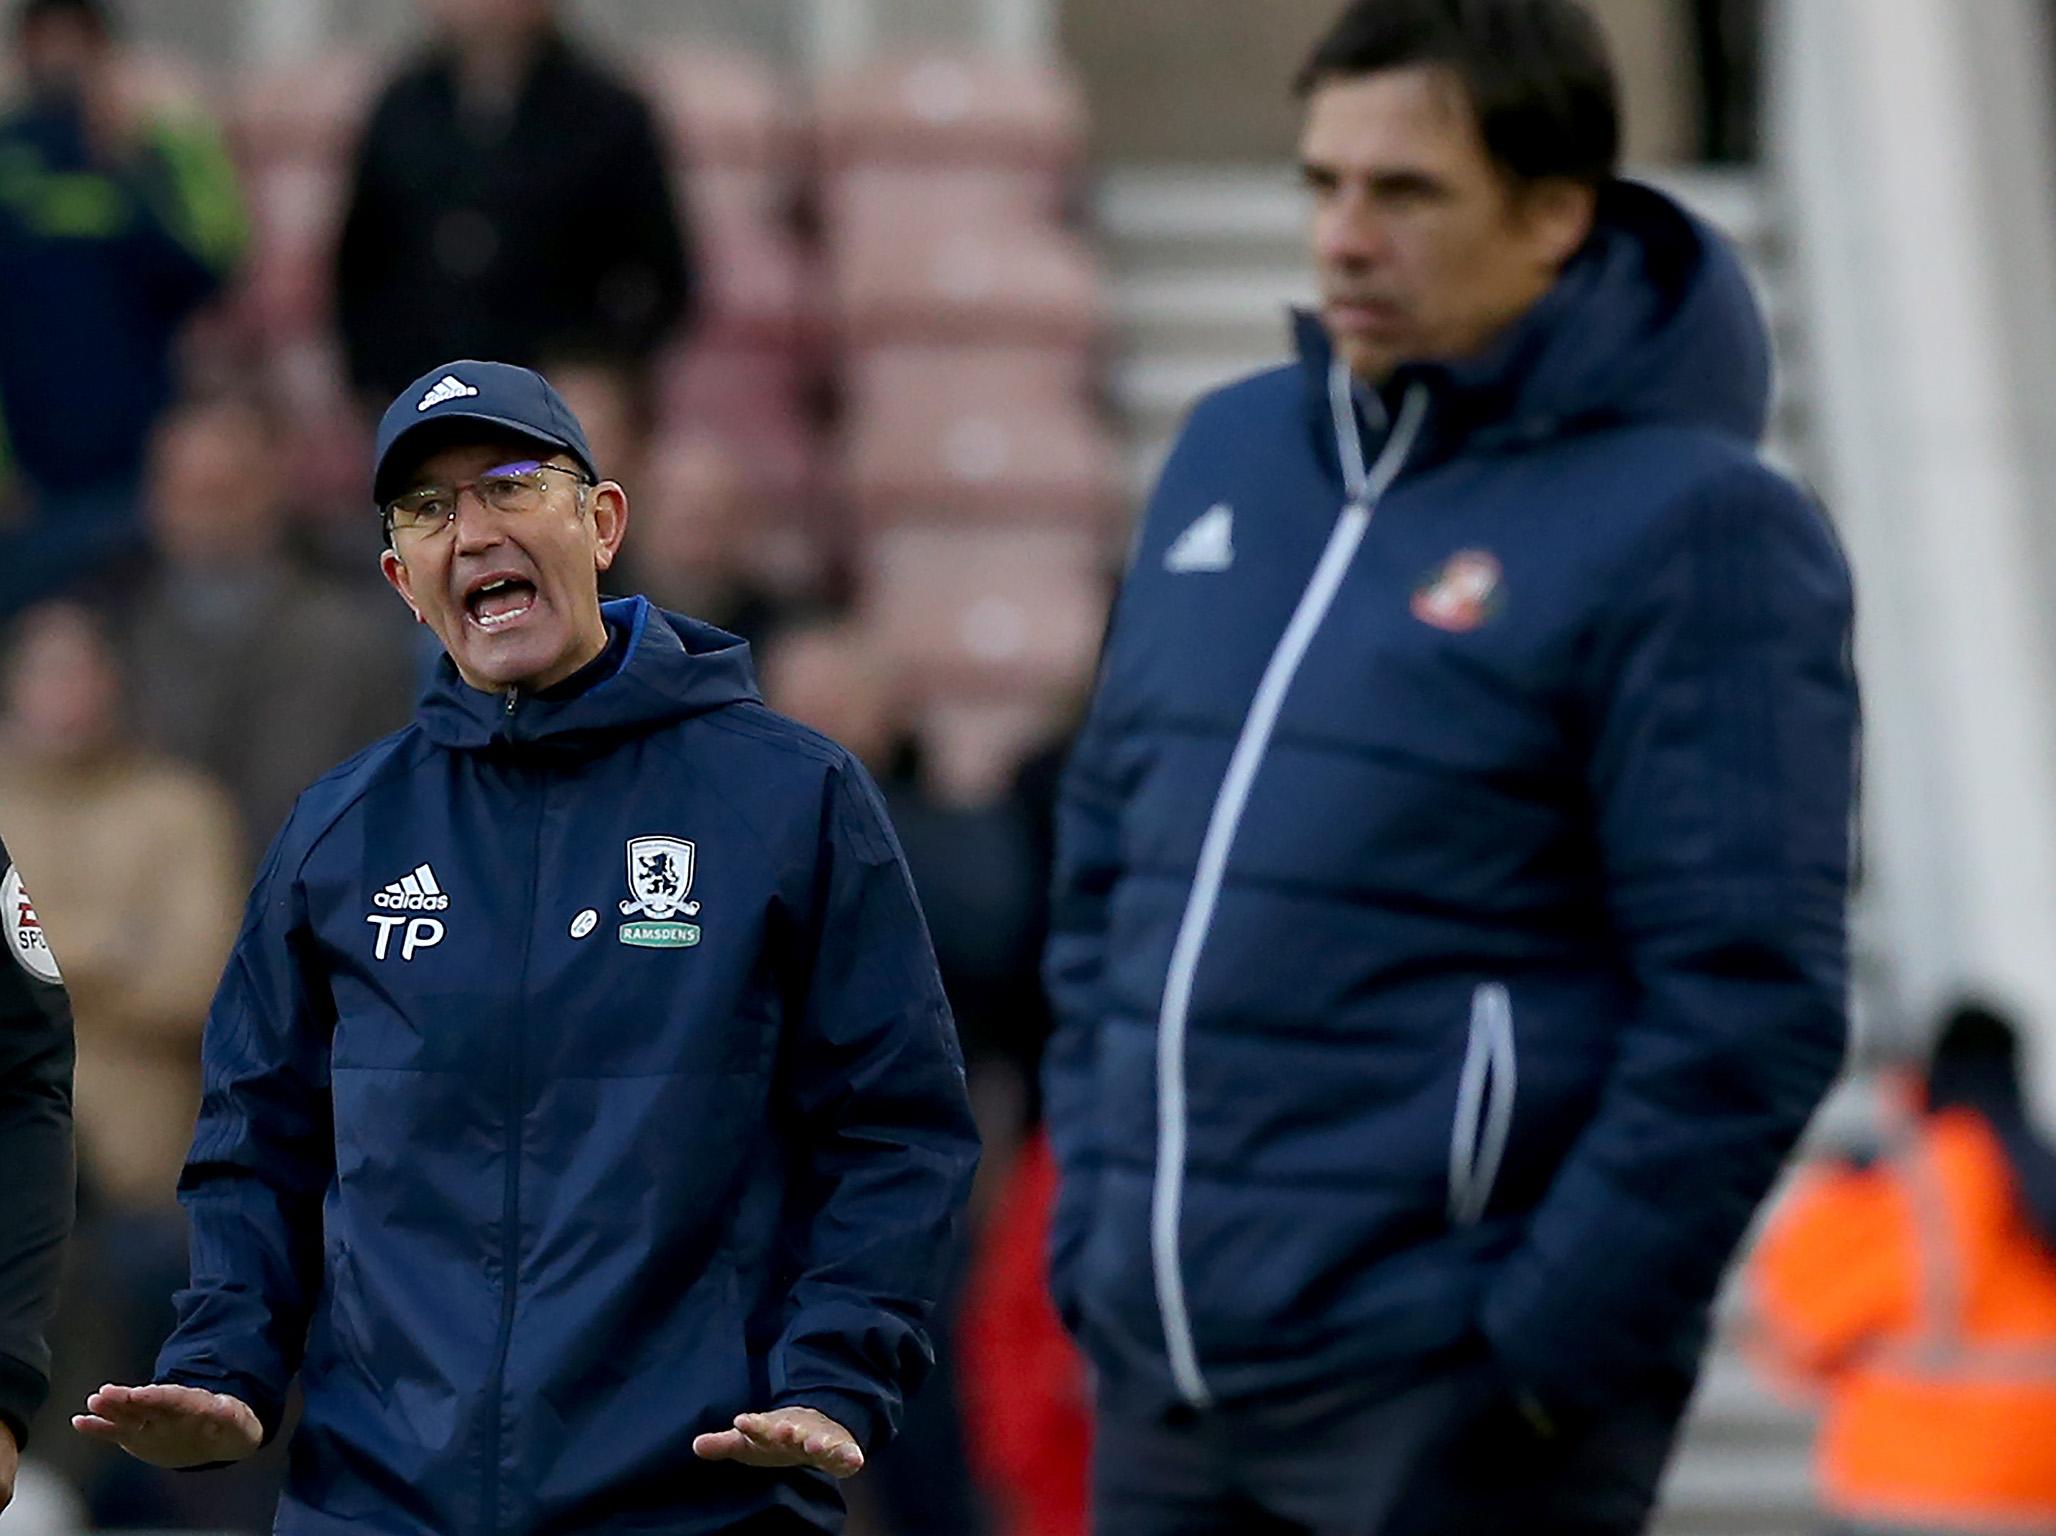 Middlesbrough&apos;s Tony Pulis and Sunderland&apos;s Chris Coleman having different experiences in the north east